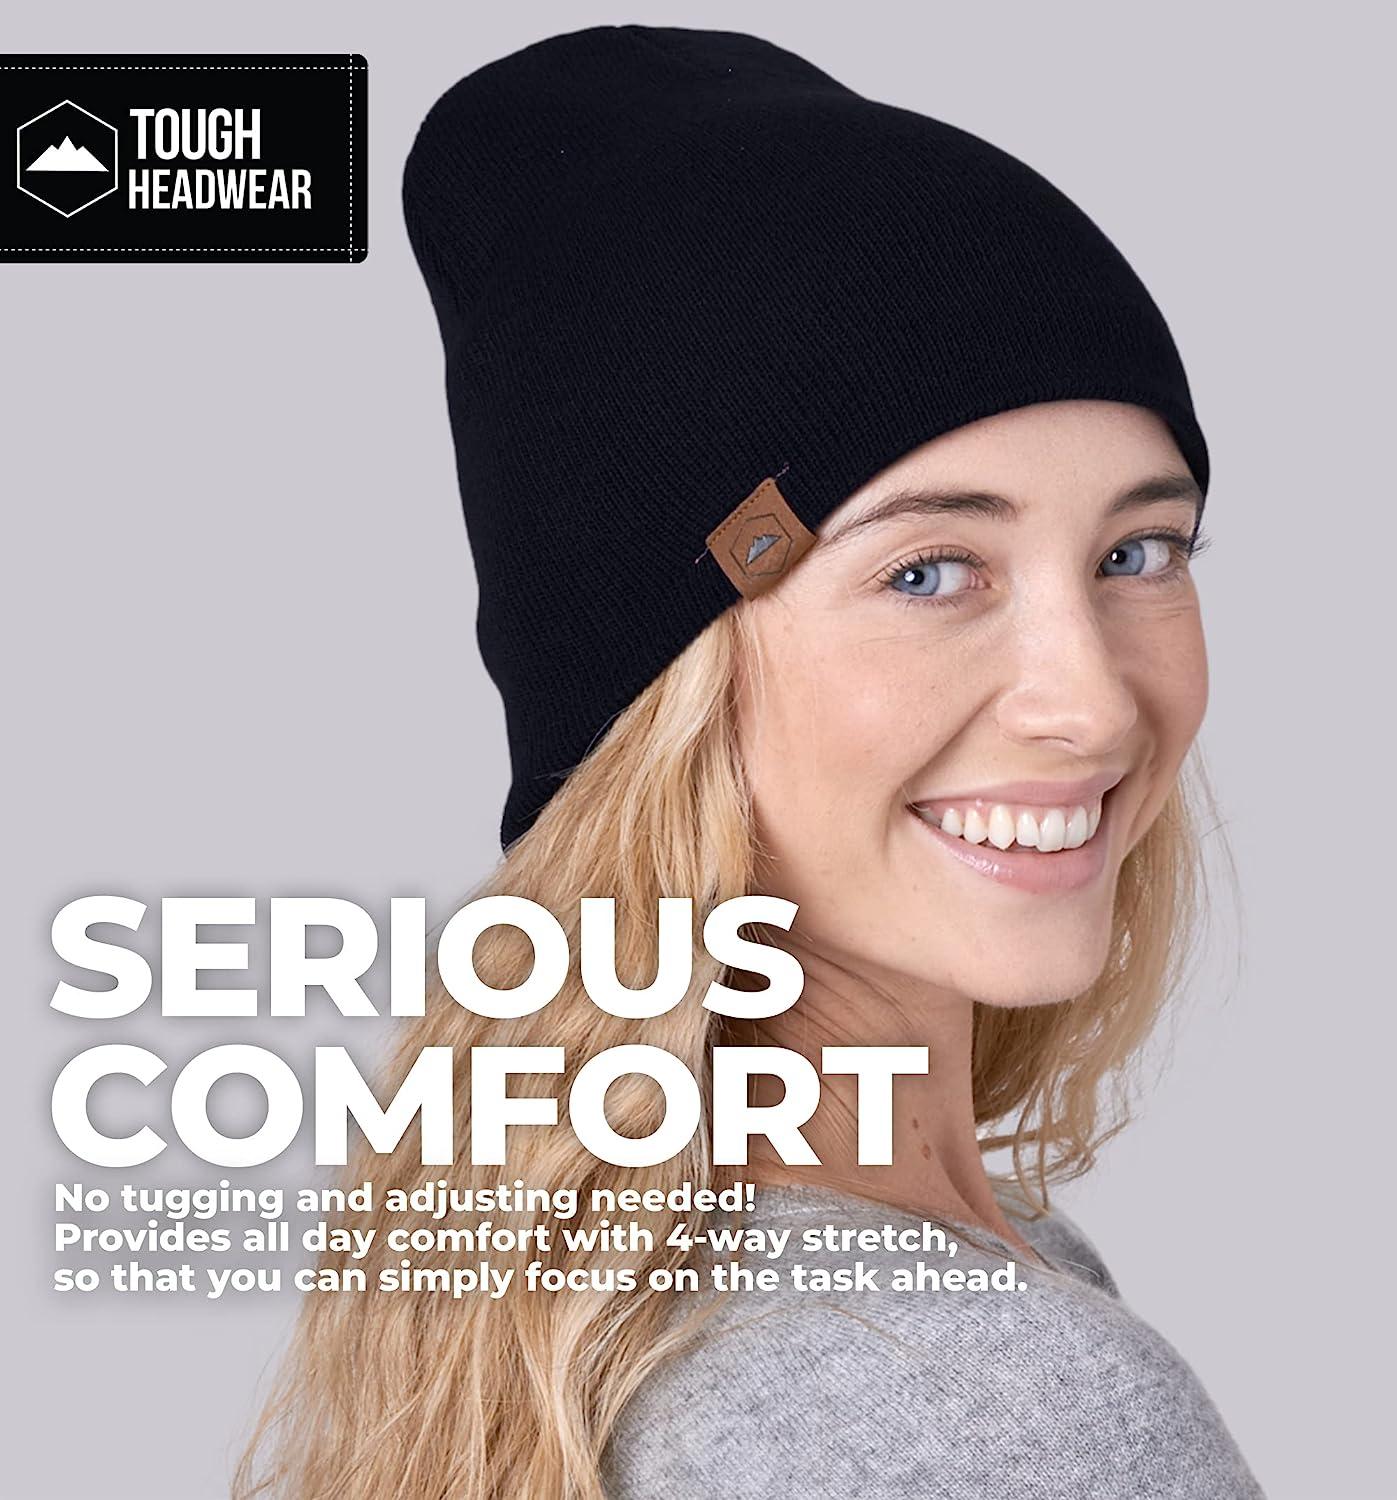 One Tough Cap and Hat Skate - Beanie Ribbed Hat, - Winter Cold for Headwear Women Cap Men Weather Black Stocking Knit Toboggan for Warm Size